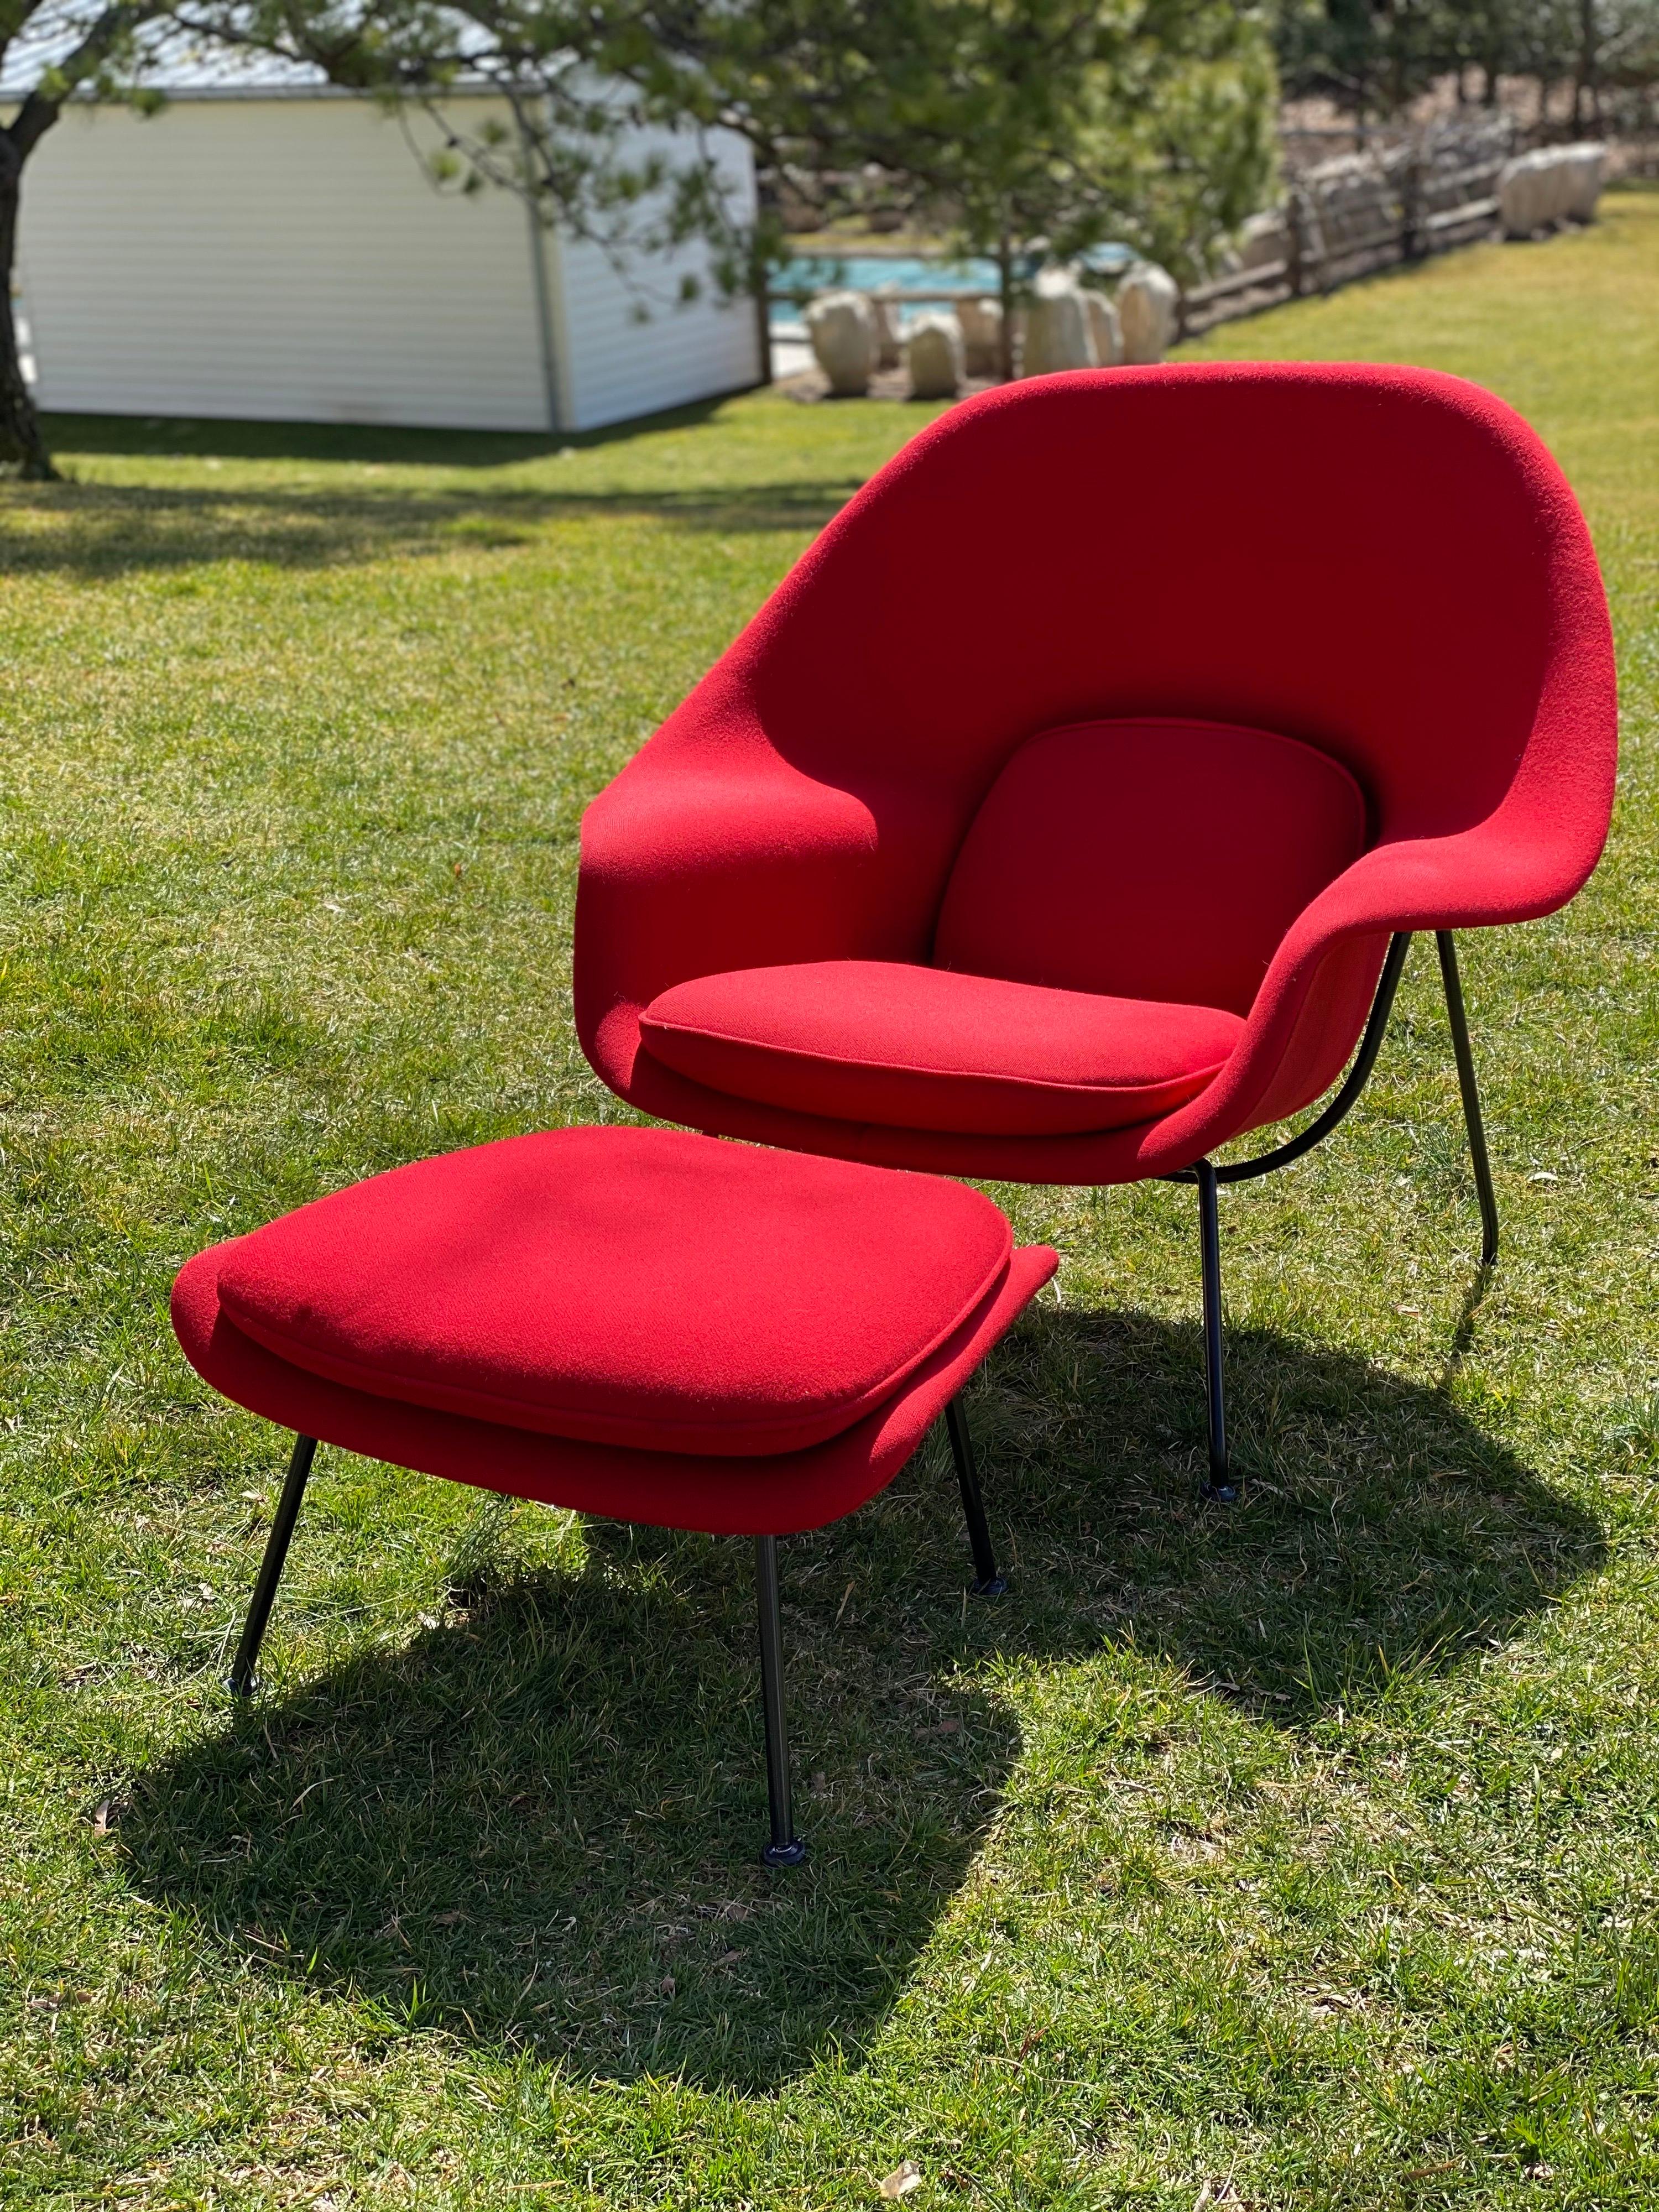 This Iconic original Womb Chair and accompanying ottoman is by famed Finnish/ American designer Eero Saarinen and produced by Knoll. The chair and ottoman were recovered, some 25 plus years ago, in a red fabric very similar to the original red